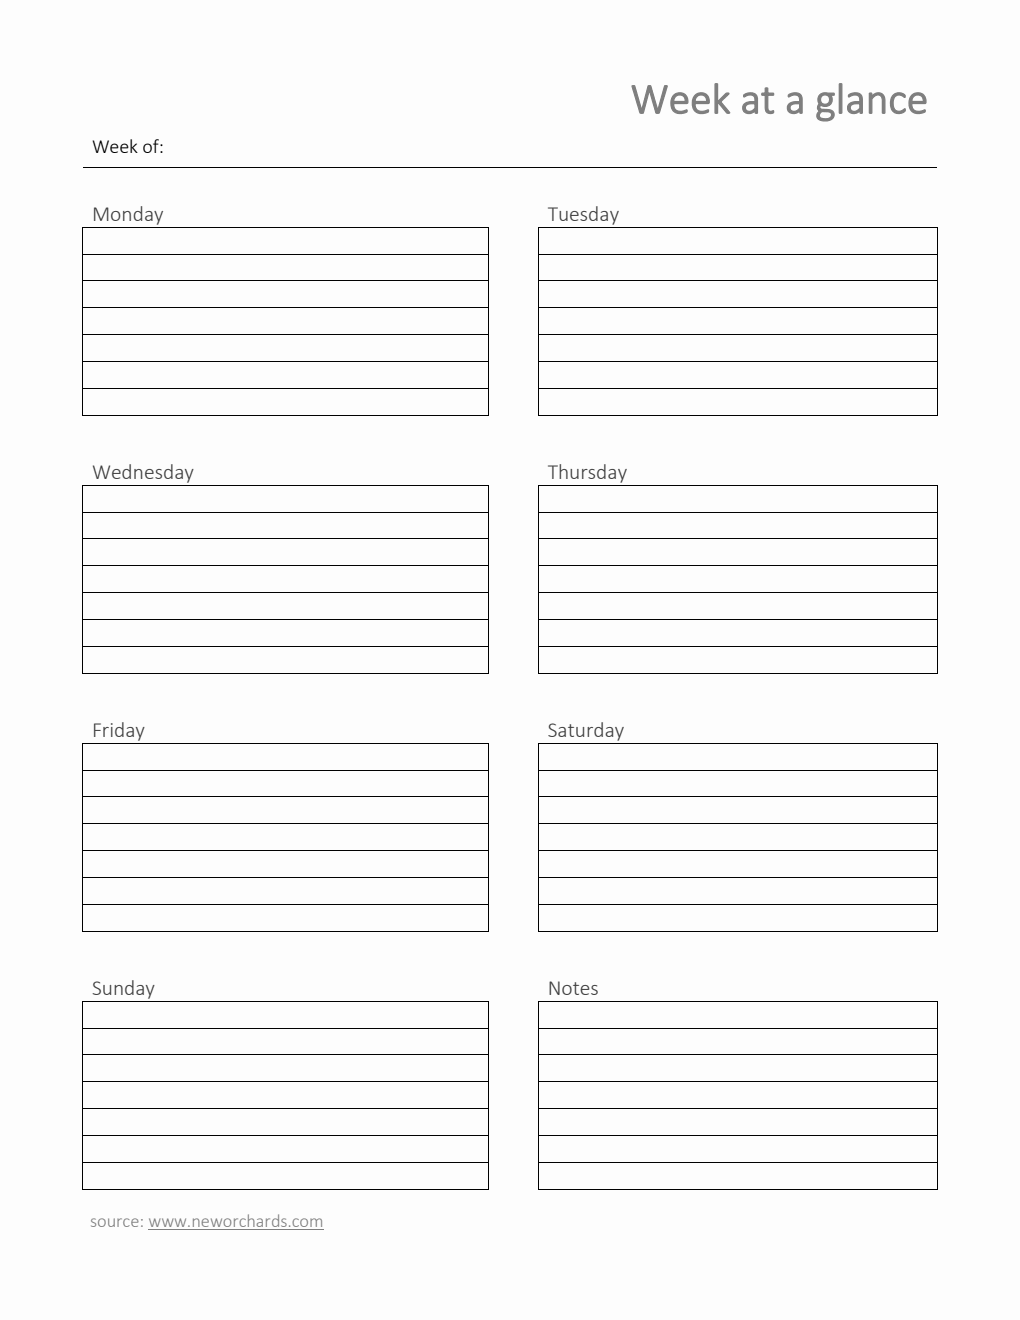 Downloadable Week at a Glance Template (Word)